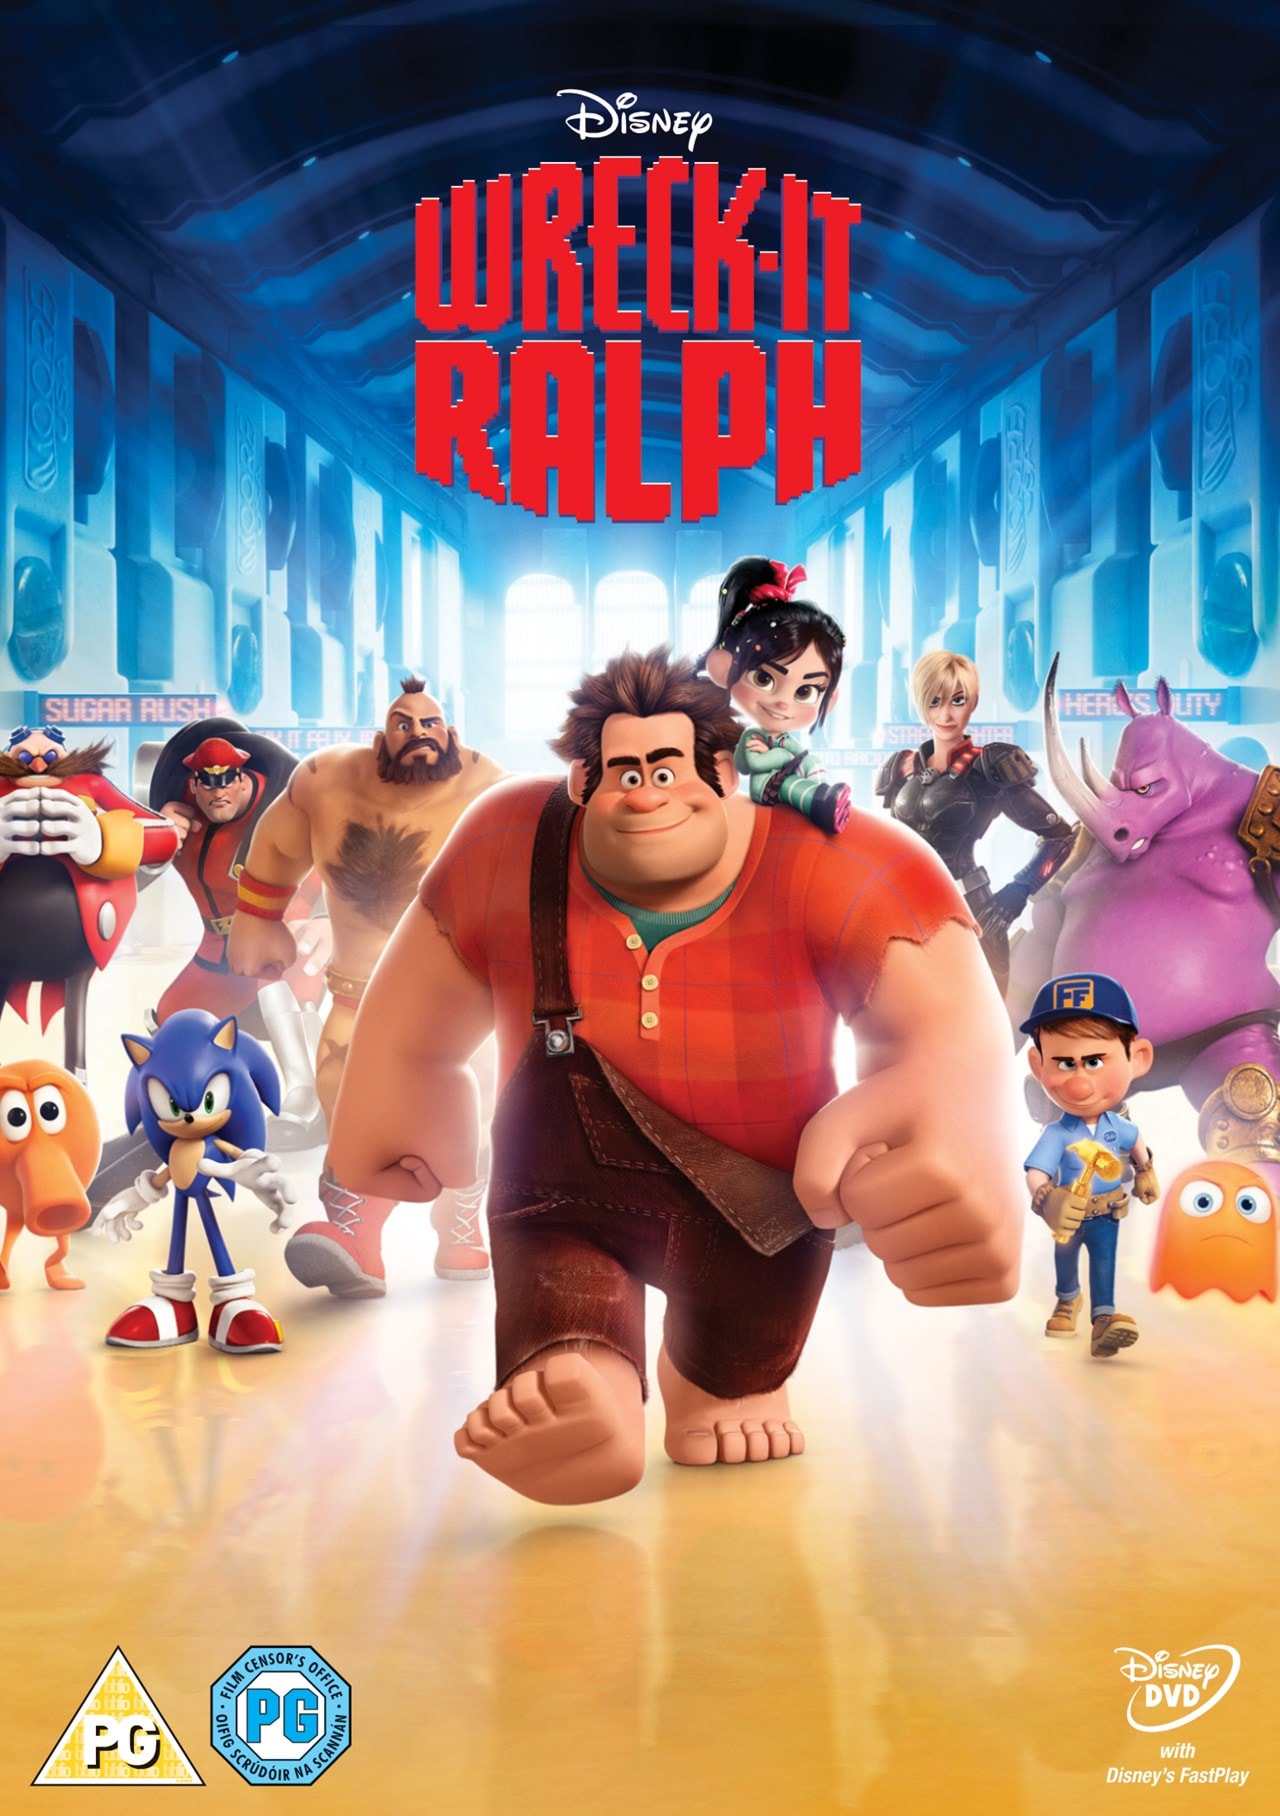 Wreck-it Ralph | DVD | Free shipping over £20 | HMV Store
